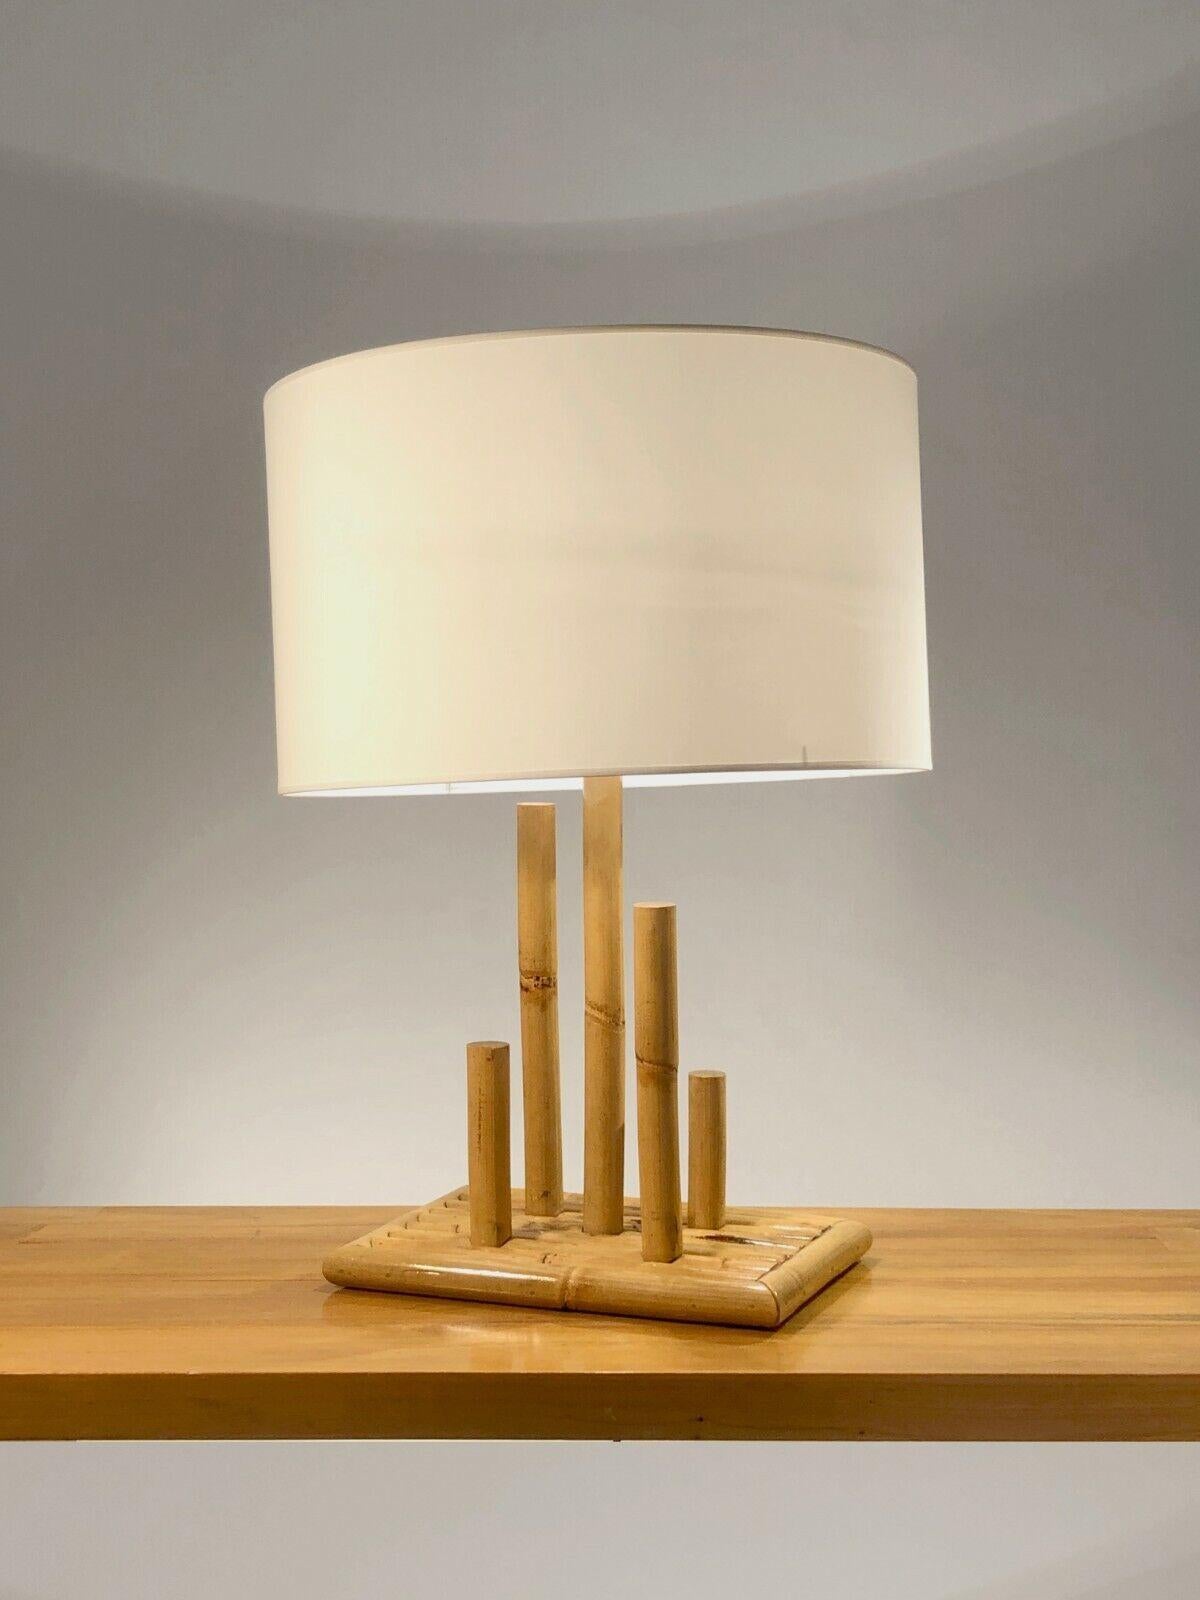 An interesting and graphic table lamp with 5 bamboos, Modernist, Free-Form, Brutalist, Rustic-Modern, Popular Art, rectangular bamboo base, planted with 5 axes of different sizes in bamboo forming a real graphic composition, the axis central and the